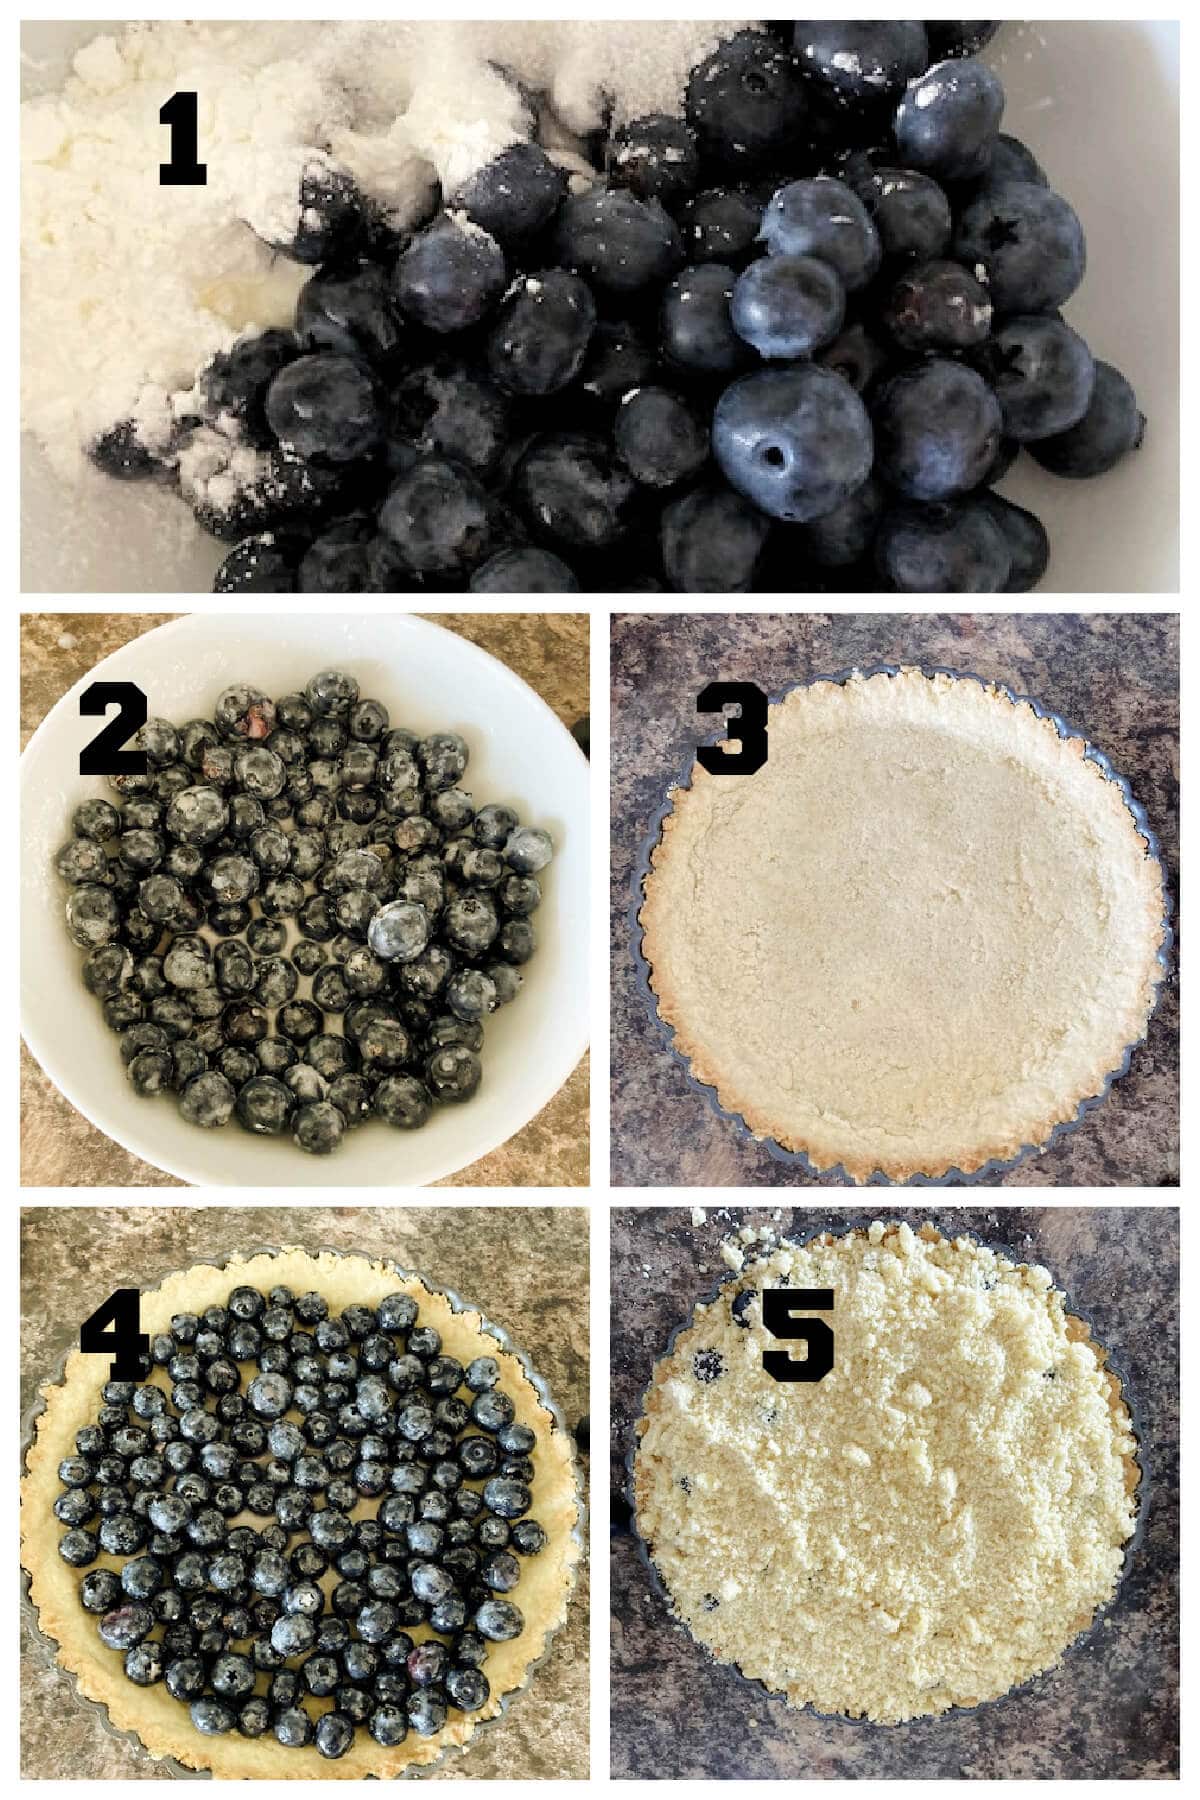 Collage of 5 photos to show how to make blueberry filling for pies.